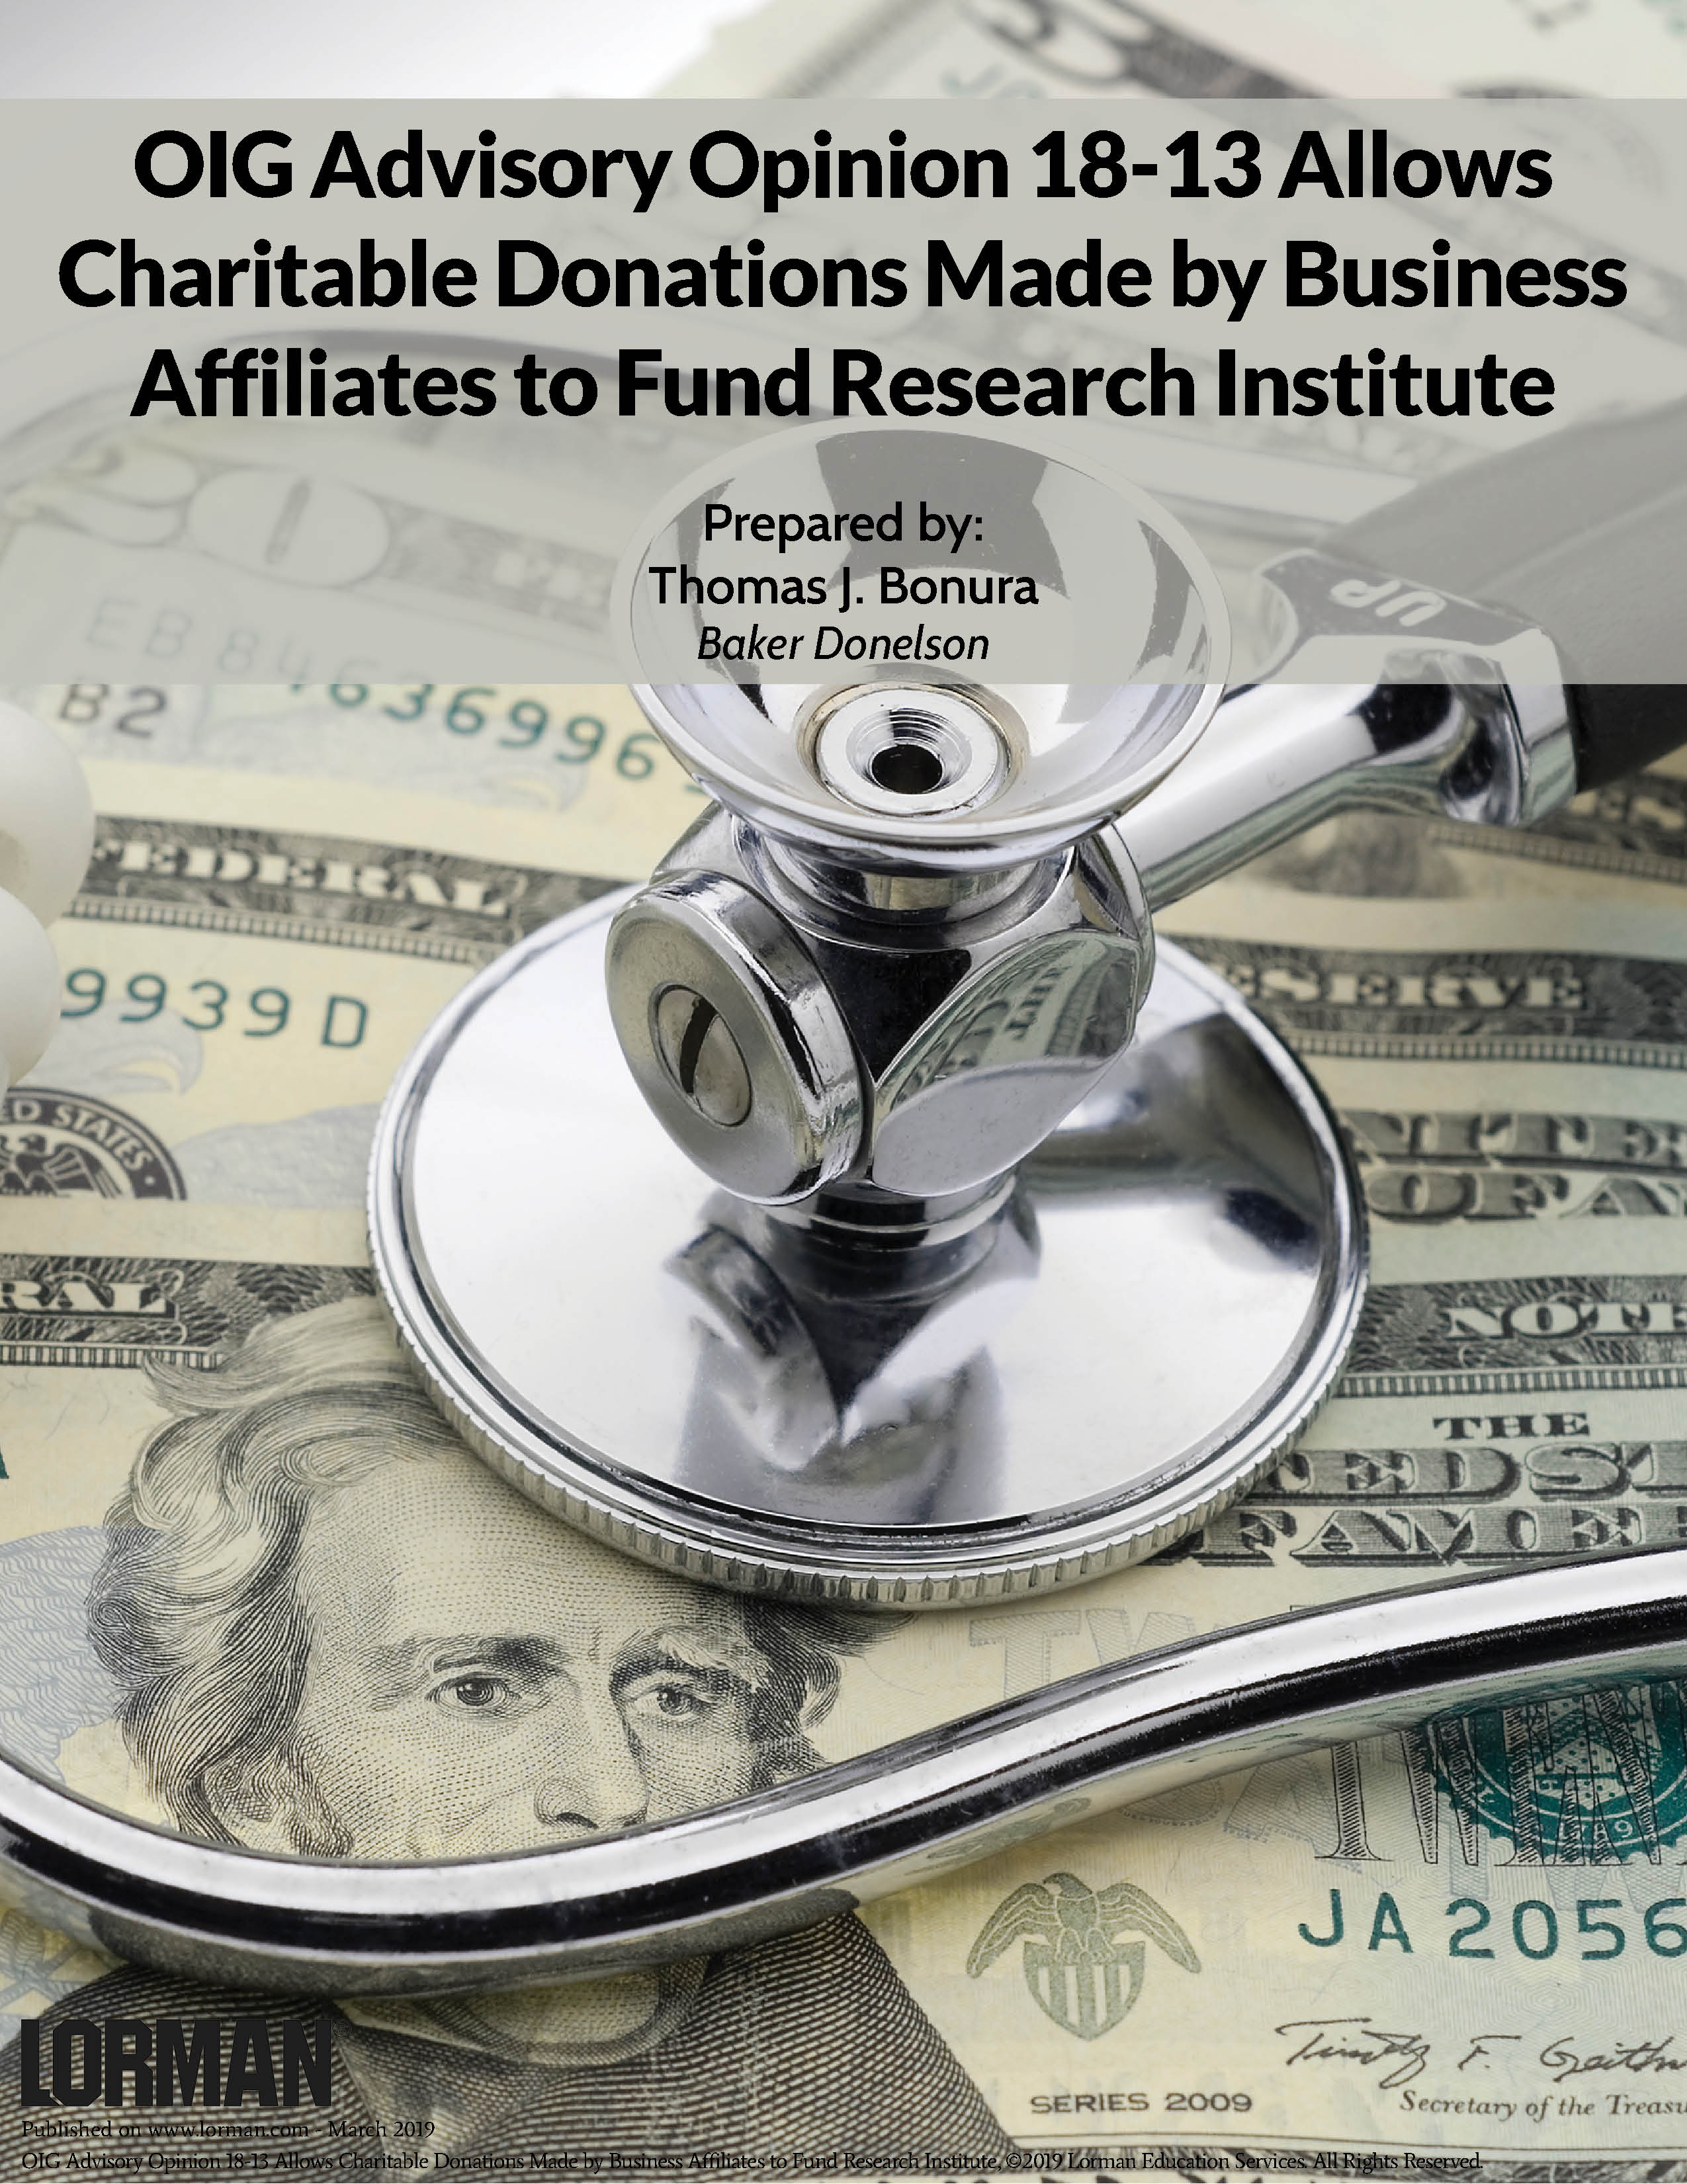 OIG AO 18-13 Allows Charitable Donations Made by Business Affiliates to Fund Research Institute